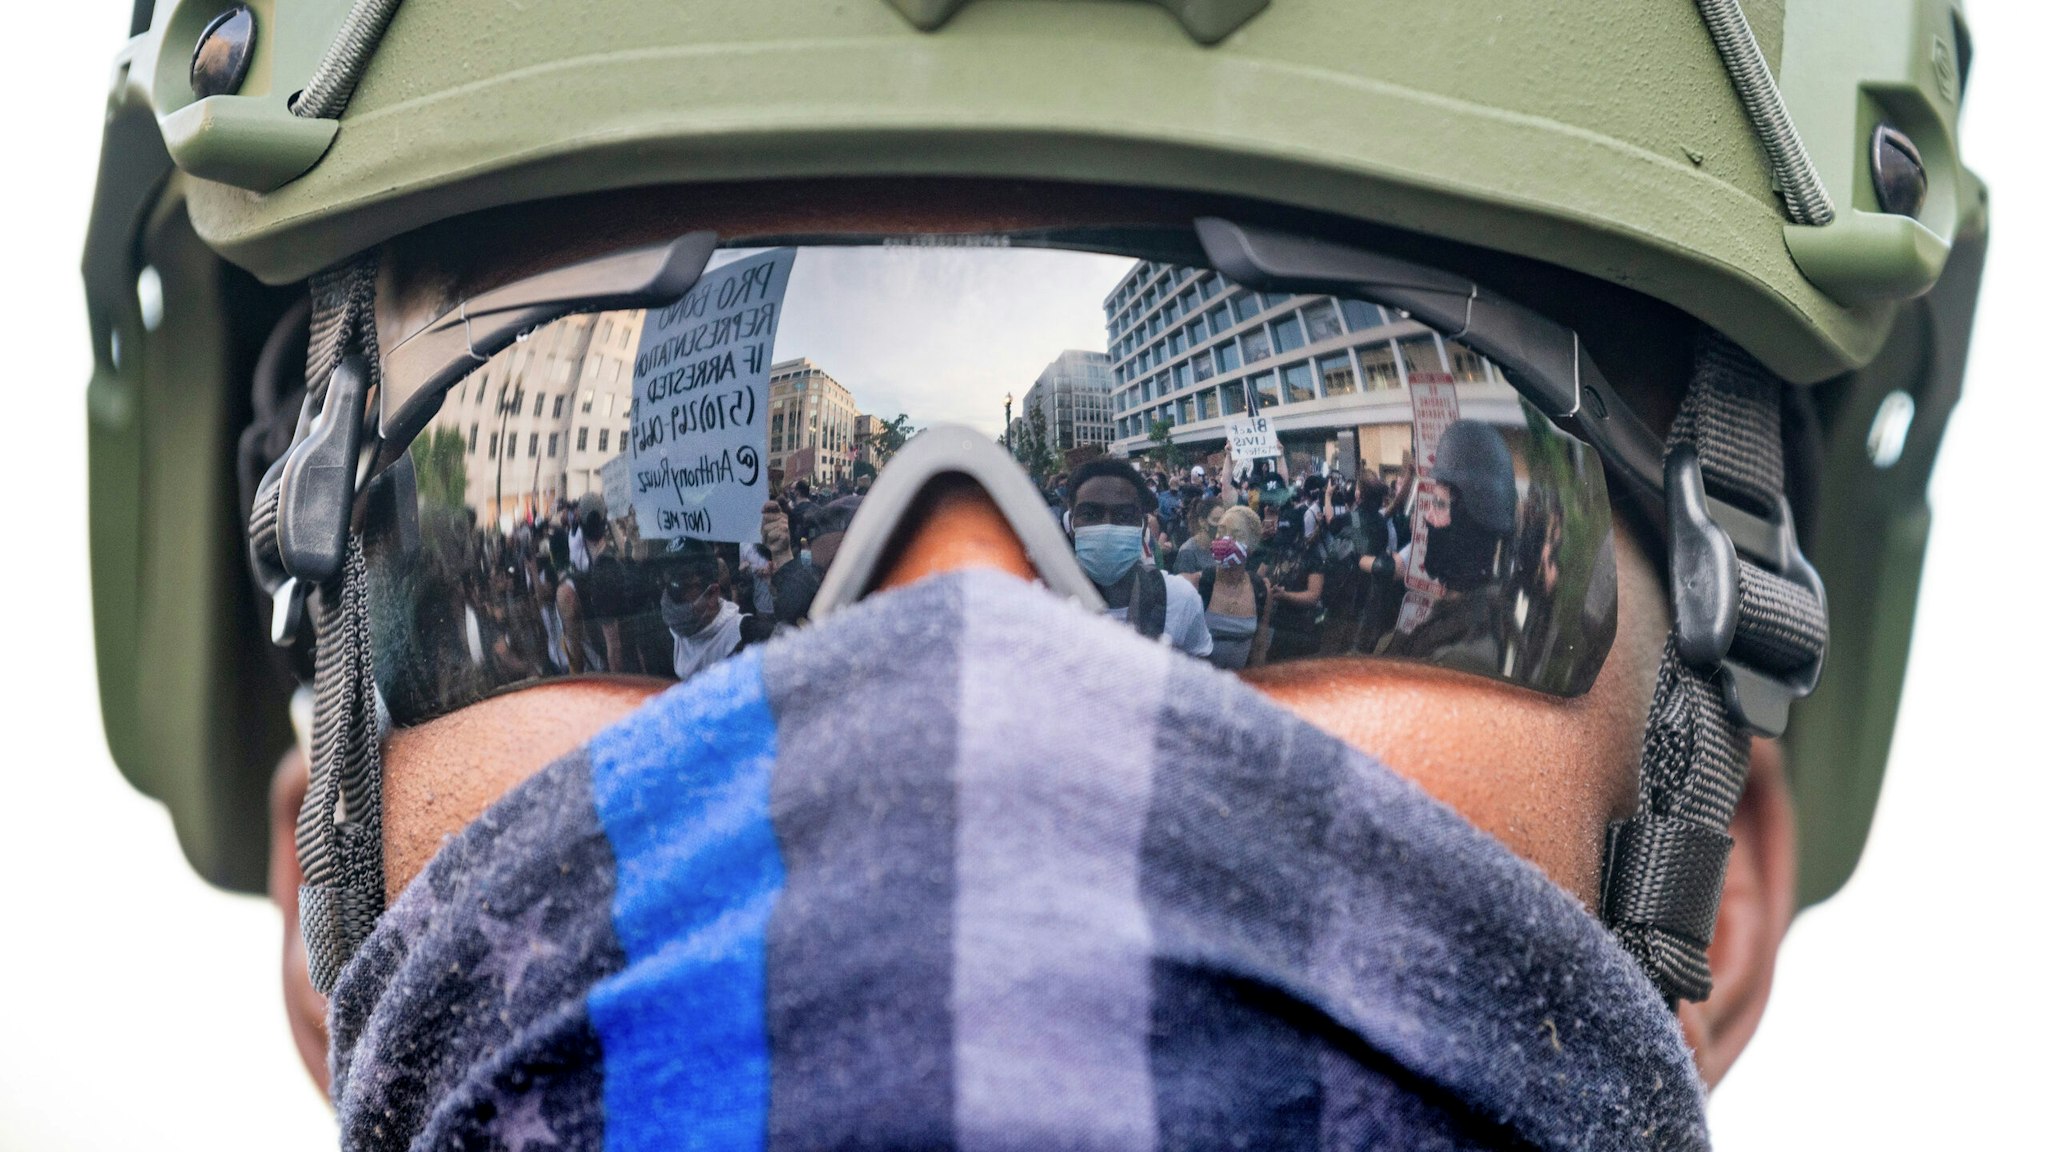 Protesters are reflected in the glasses of an US Army National Guard member as they demonstrate the death of George Floyd near the White House on June 3, 2020, in Washington, DC. - Former Minneapolis police officer Derek Chauvin, who kneeled on the neck of George Floyd who later died, will now be charged with second-degree murder, and his three colleagues will face charges of aiding and abetting second-degree murder, court documents revealed on June 3.